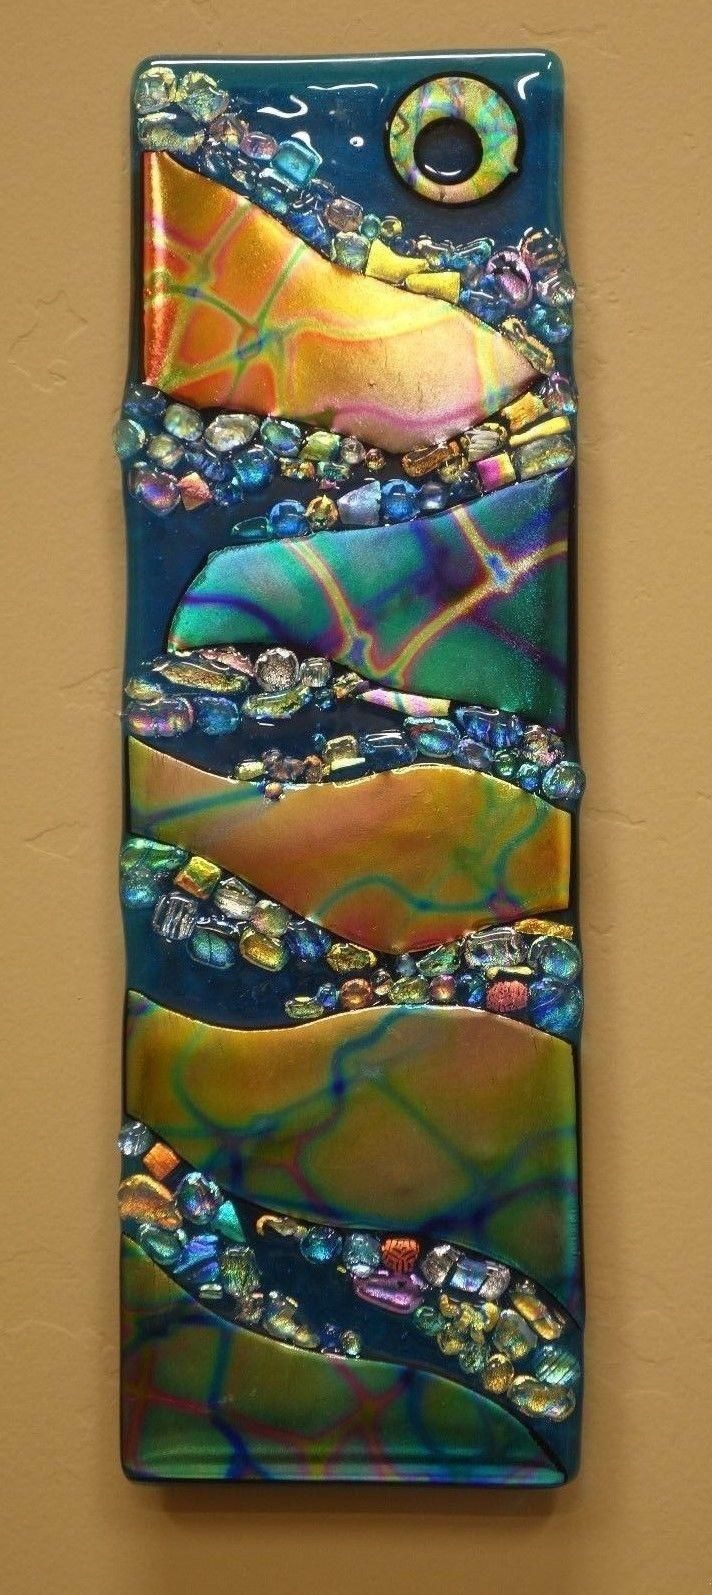 1599 Best Fusing Images On Pinterest | Fused Glass, Glass Art And Regarding Fused Glass Wall Art By Frank Thompson (View 14 of 20)